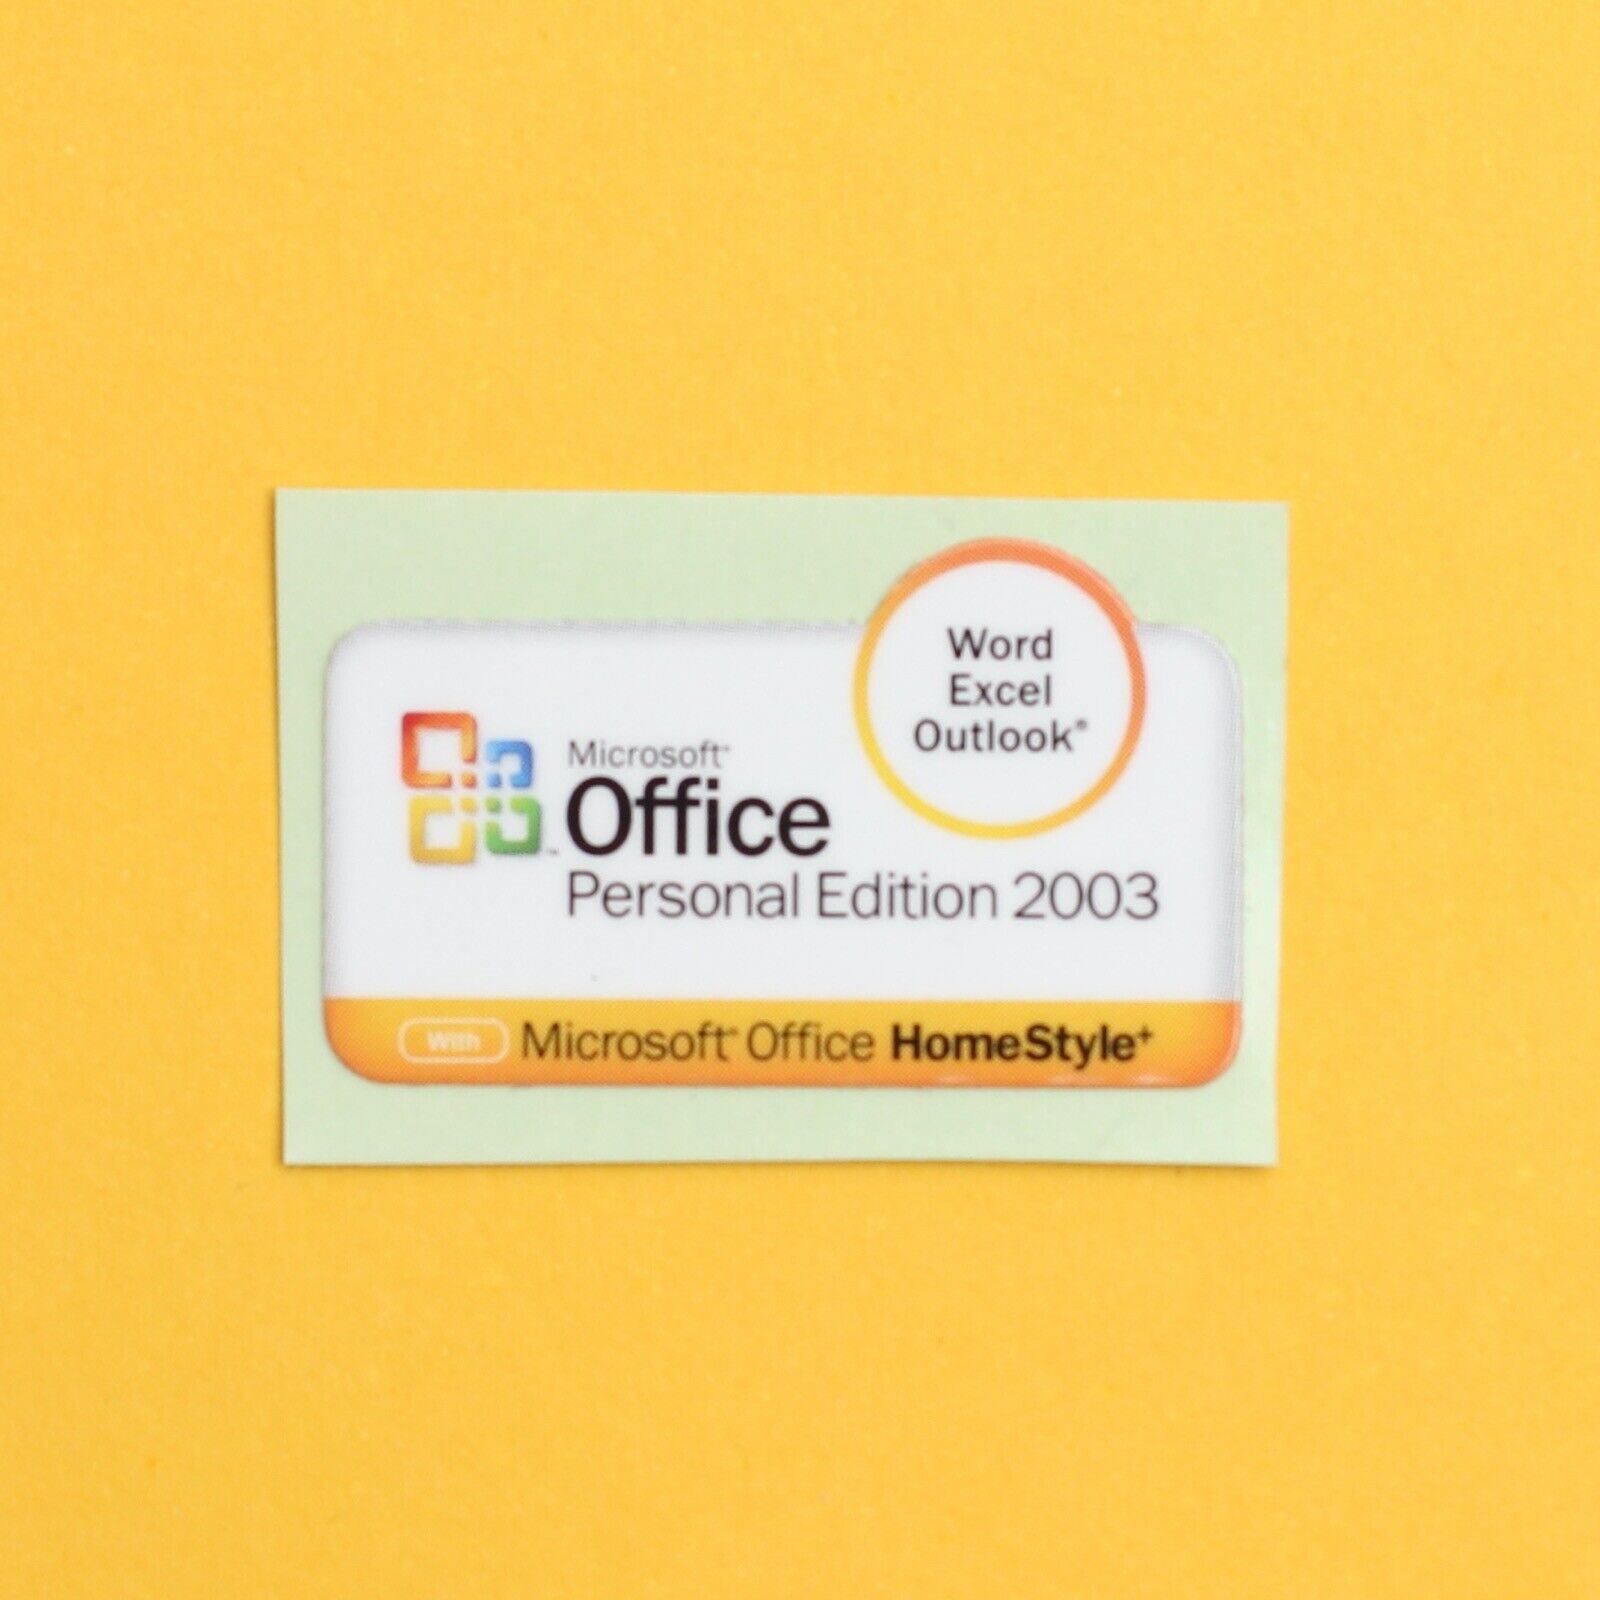 Genuine NOS Microsoft Office Personal Edition 2003 Case Badge Sticker *NEW*